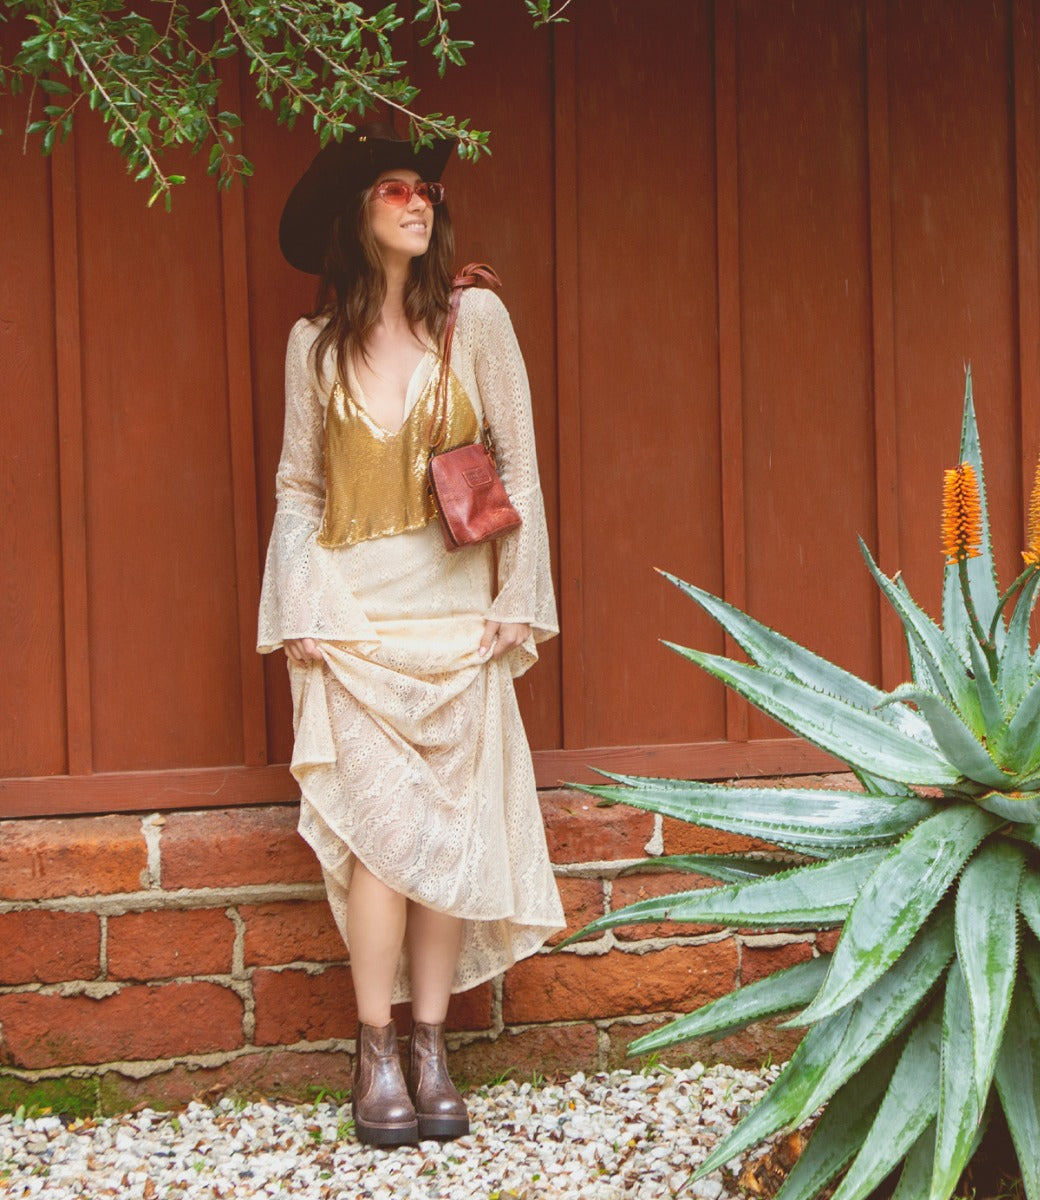 A woman wearing a Ventura hat and skirt leaning against a wall.